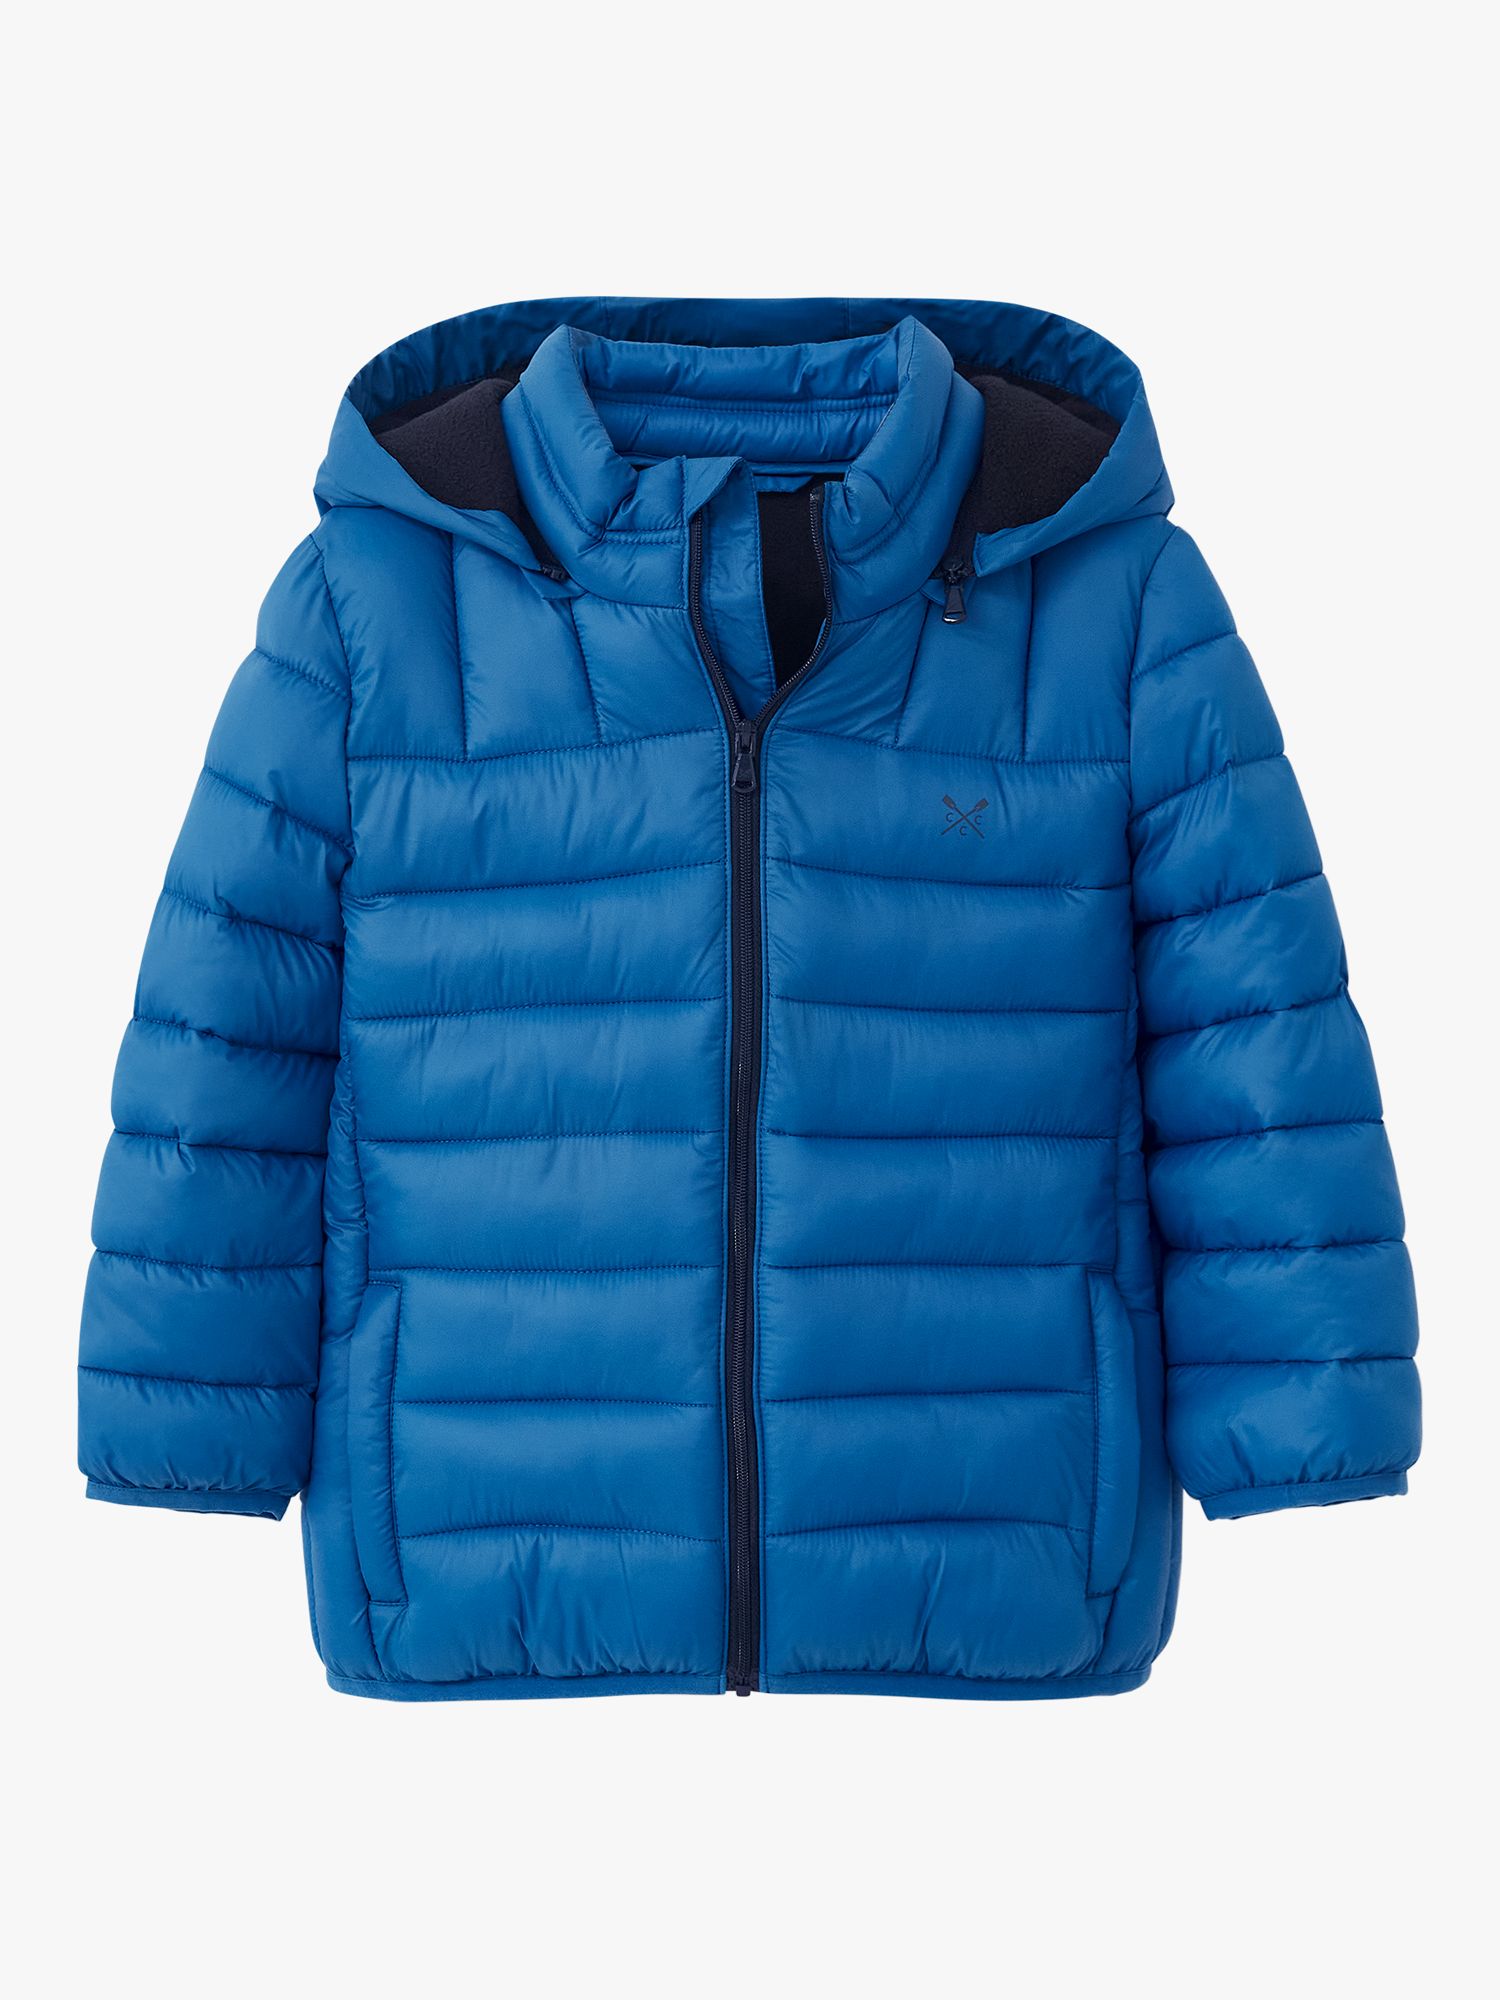 Crew Clothing Kids' Quilted Jacket, Bright Blue at John Lewis & Partners